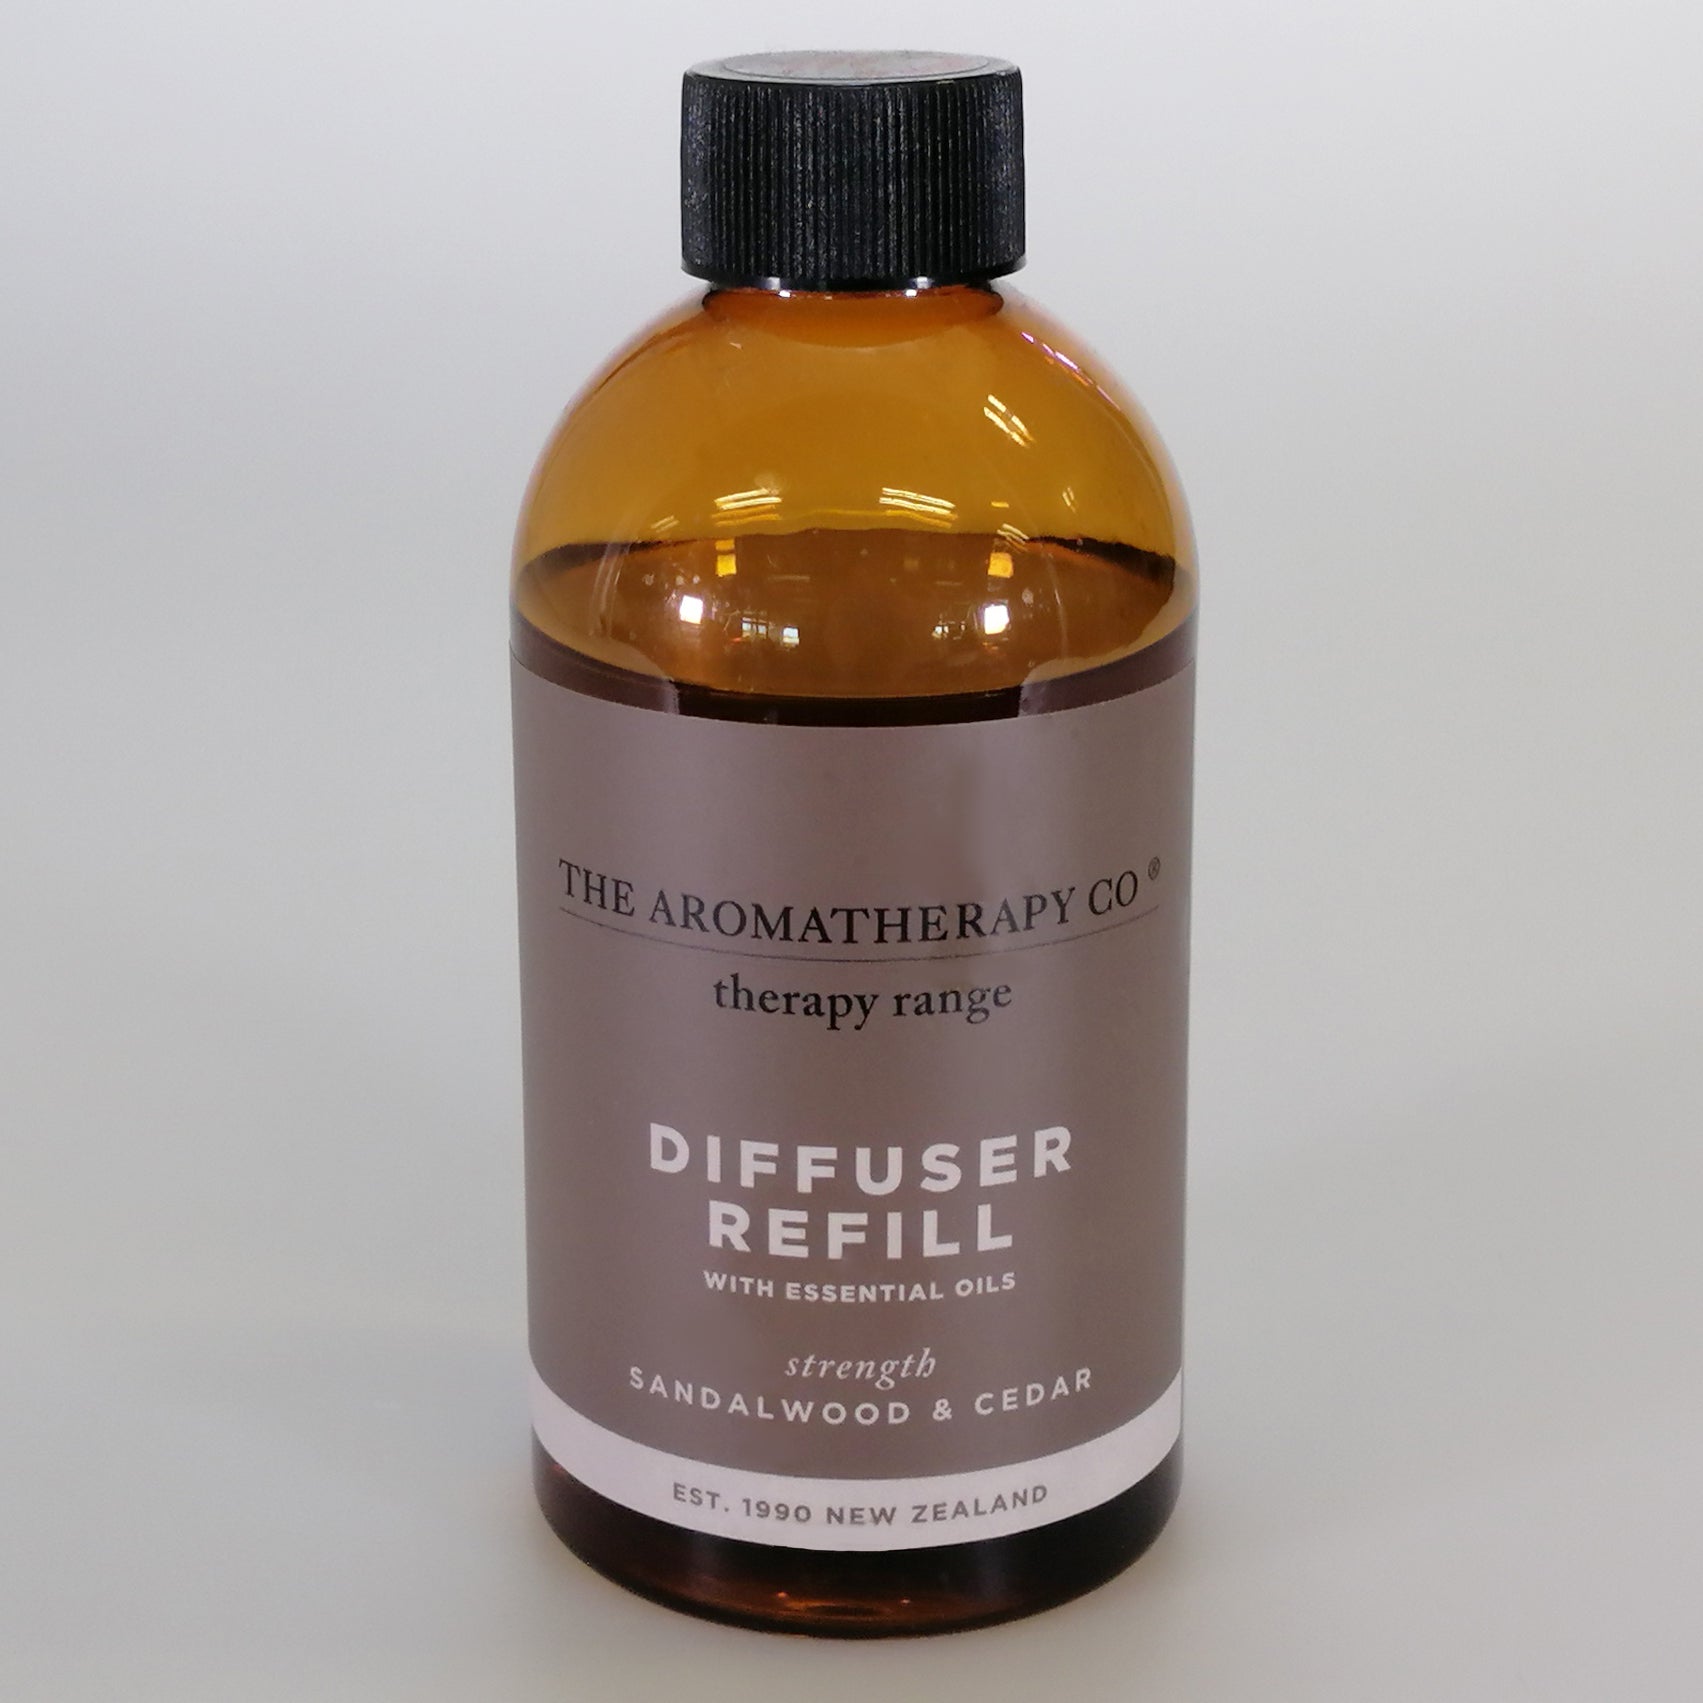 The Aromatherapy Company - Therapy Range 'Strength' - Diffuser Refill - Sandalwood & Cedar